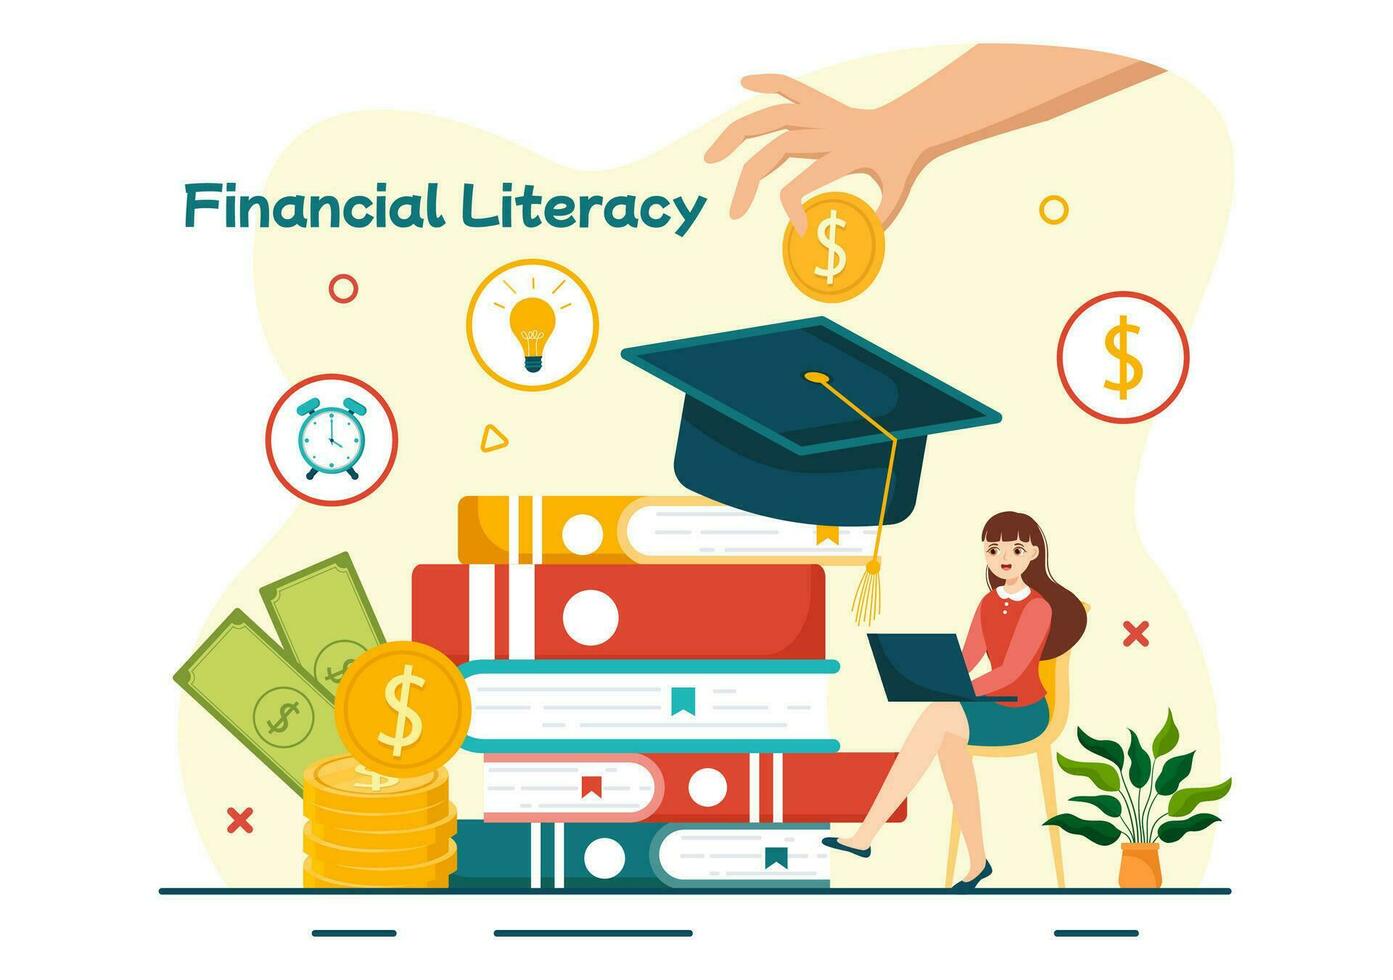 Financial Literacy Webinar Vector Illustration with Finance Management, Investment Money and Budget in Education Accounting Flat Background Design